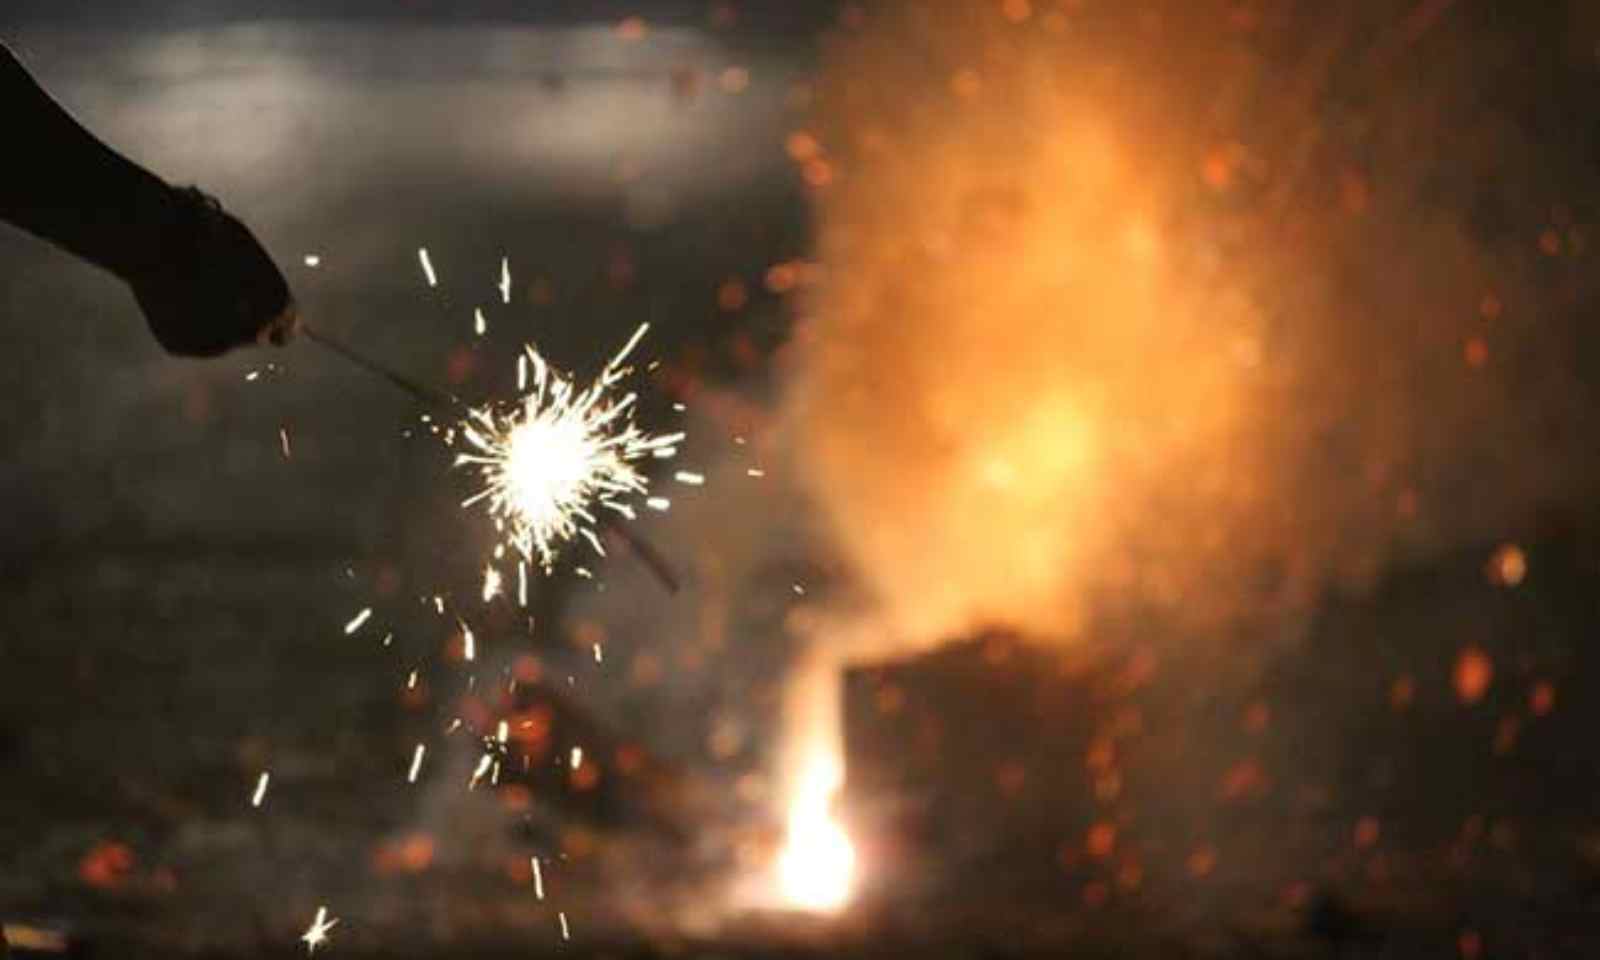 NGT Bans Use And Sale Of Fire Crackers In Delhi-NCR Regions With Poor Air Quality During COVID19 Pandemic